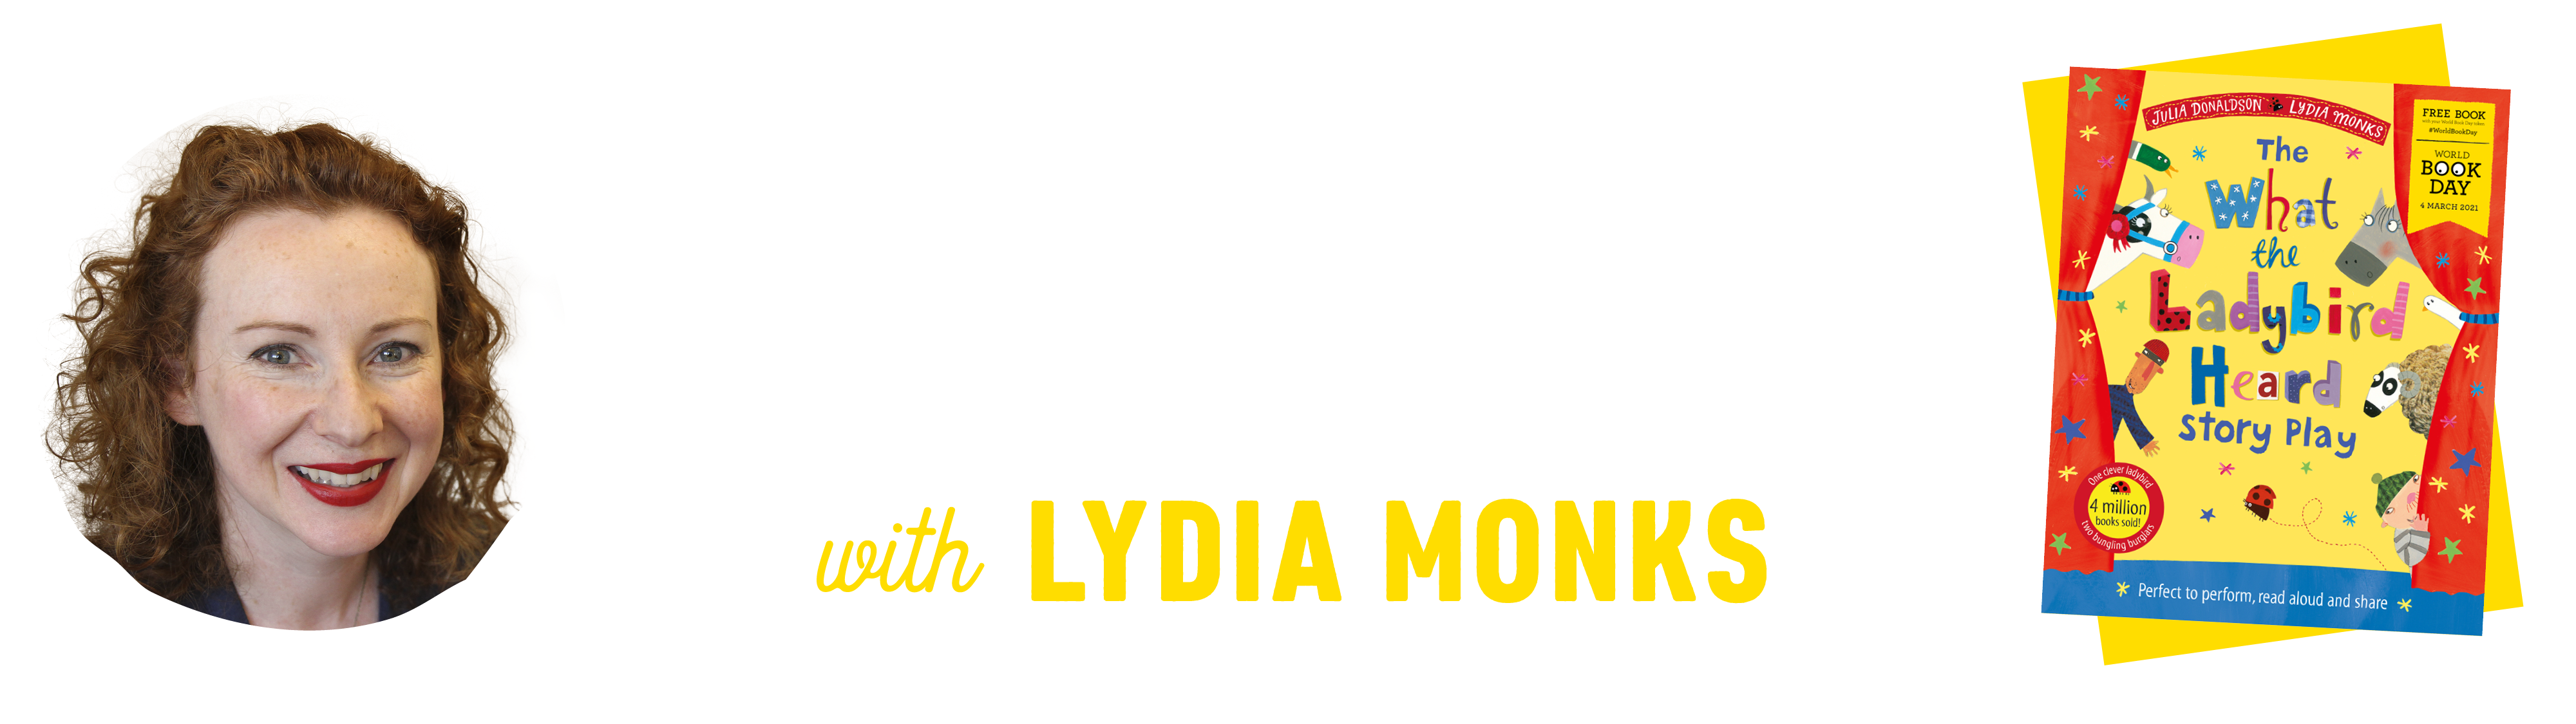 Author & Illustrator Academy: How to create a picture book theatre